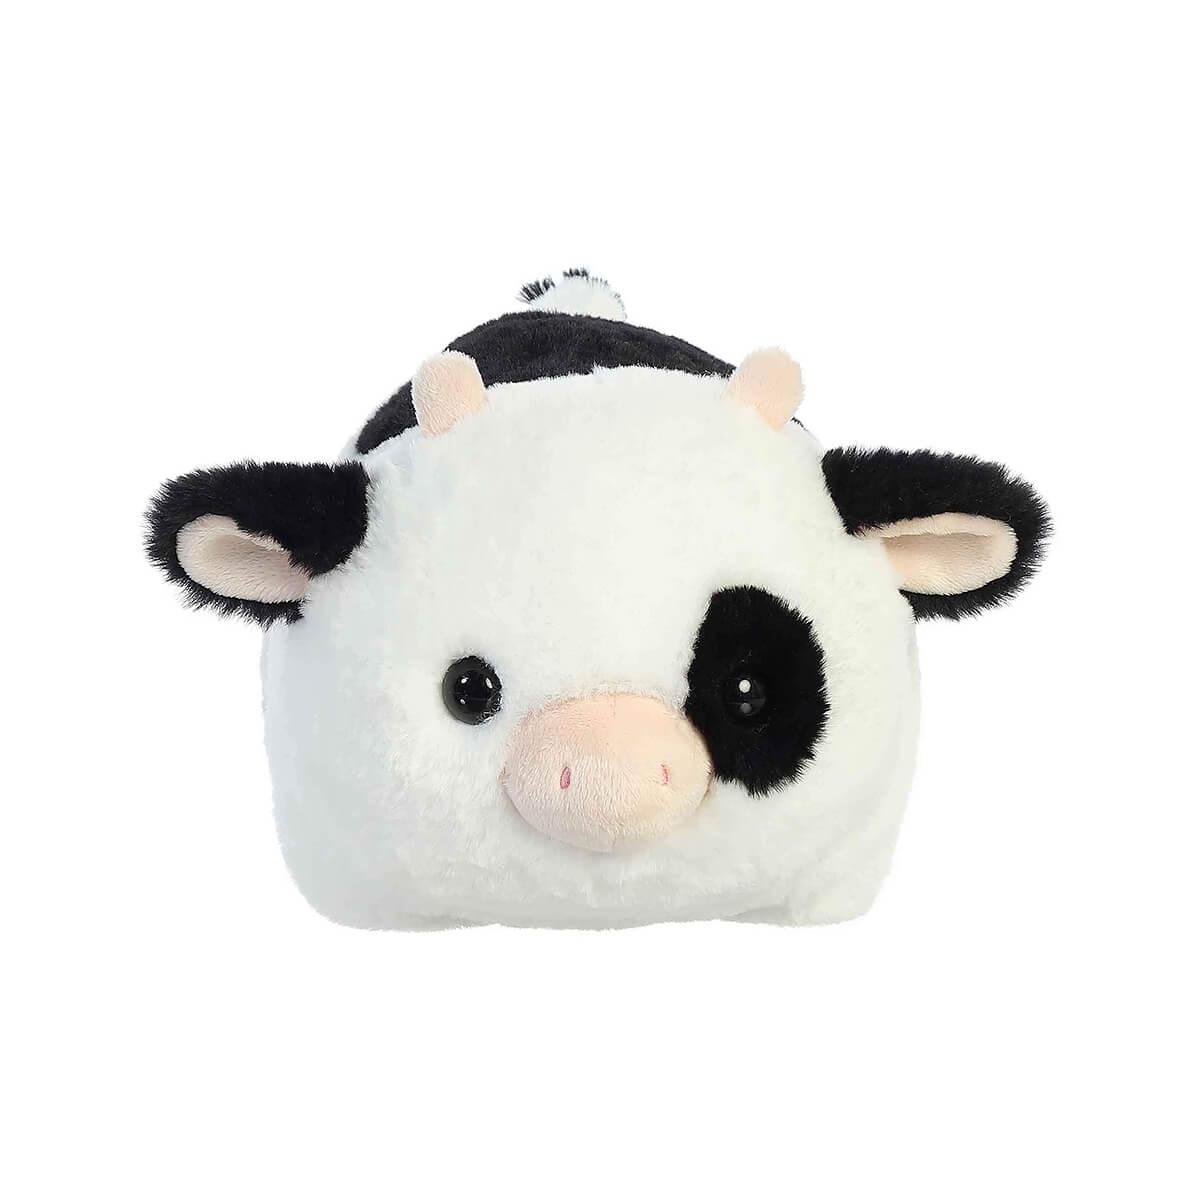 Spudsters Tutie Cow Plush Toy - 10 Inch